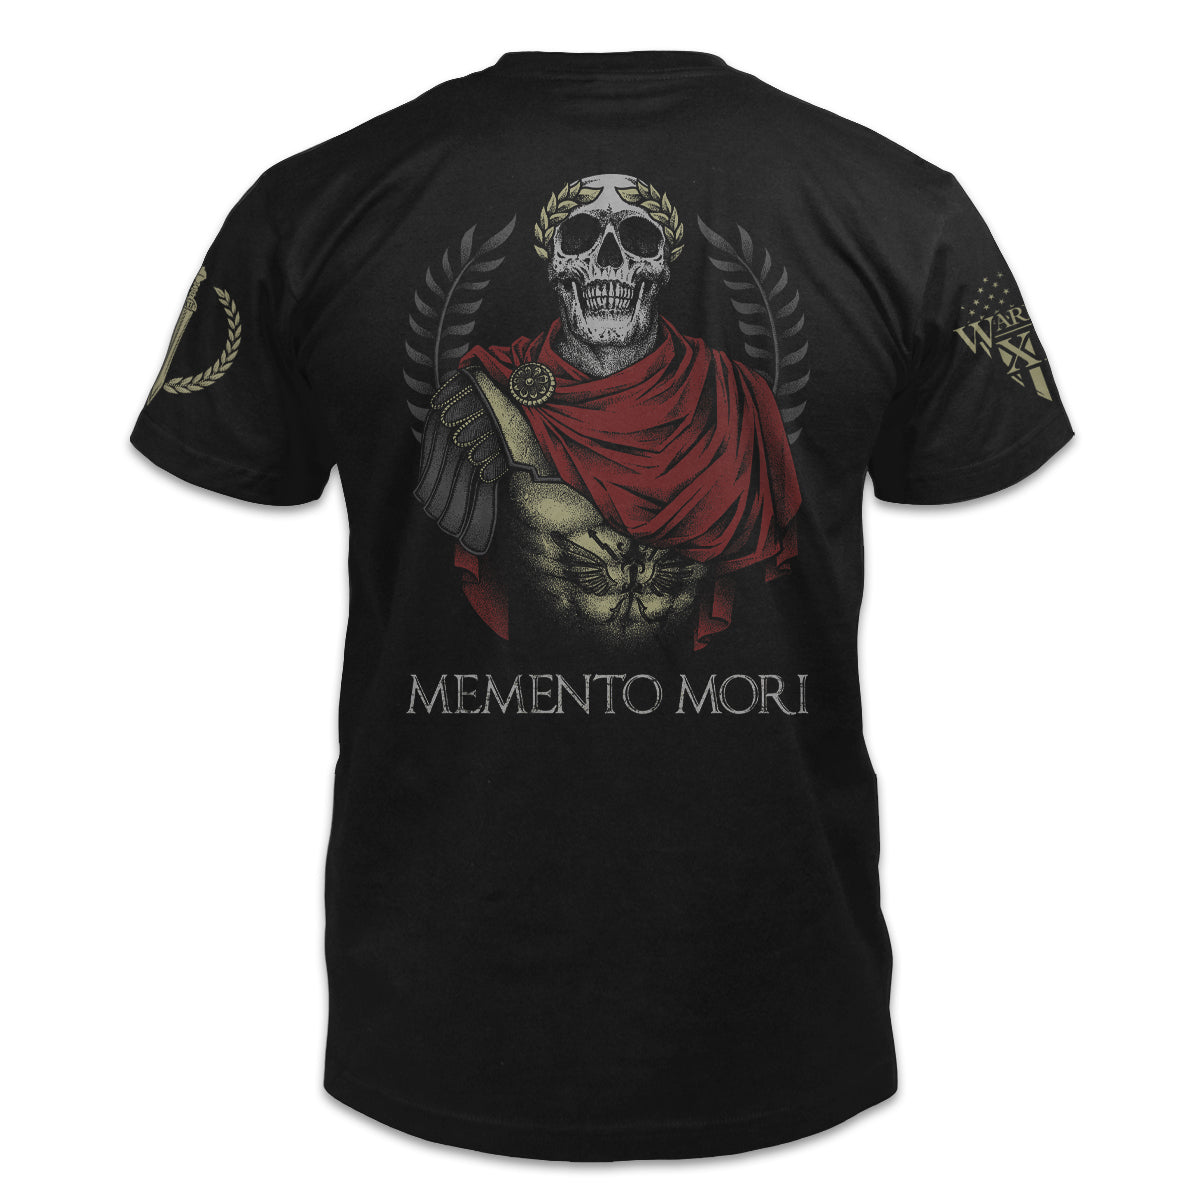 A black t-shirt with the words "Memento Mori" features a roman general and pays tribute to the practice of reflecting on one's mortality printed on the back of the  shirt. 